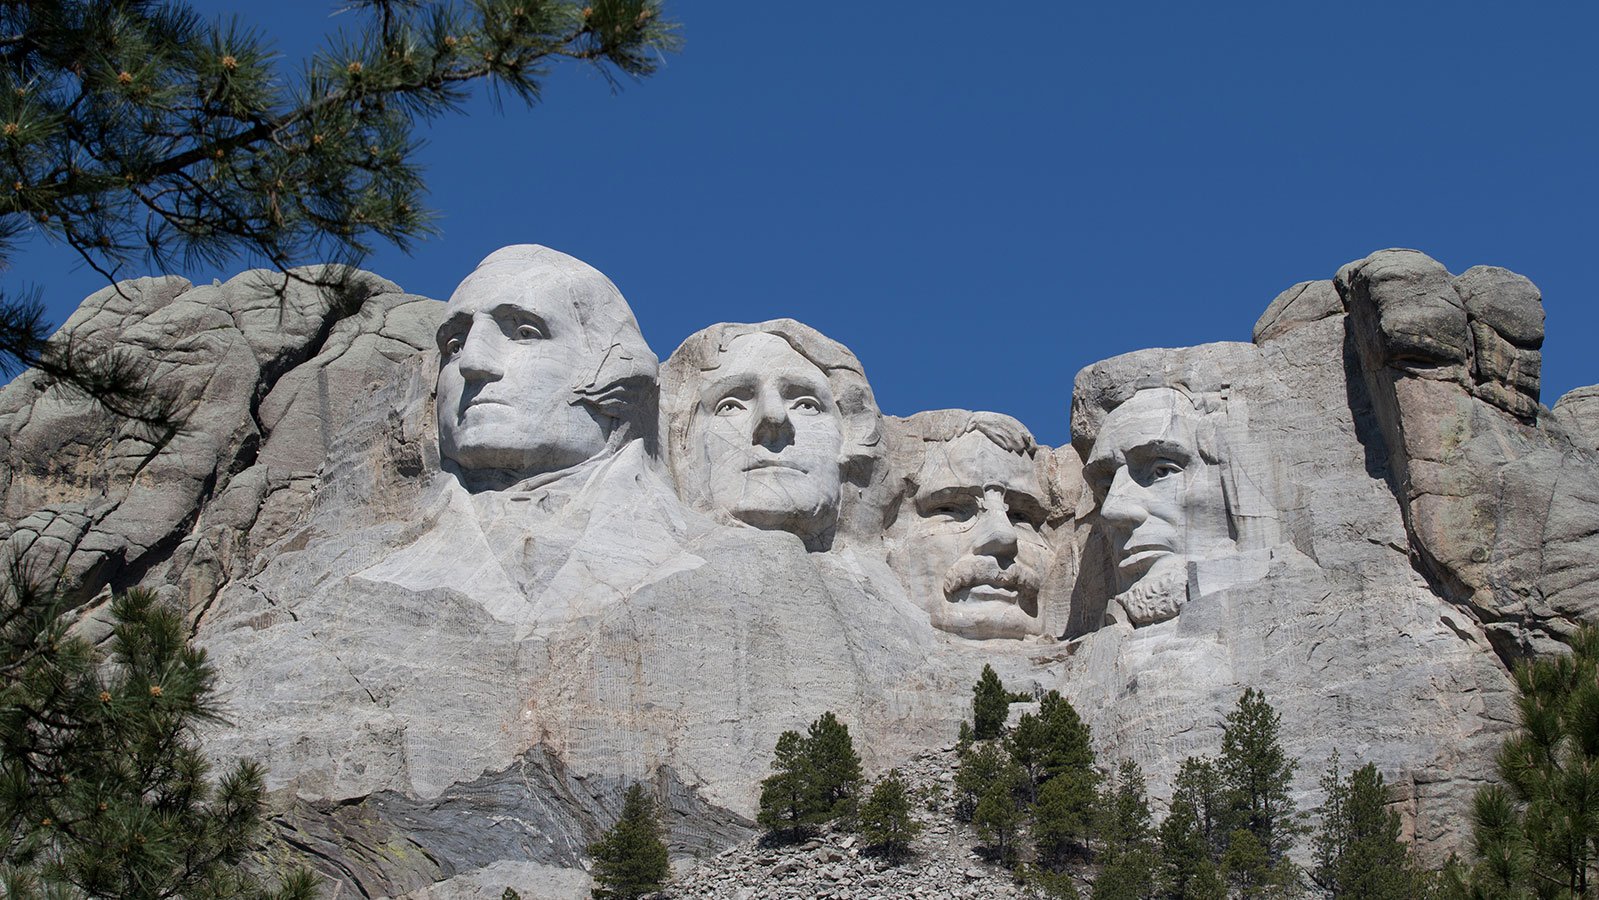 for whom is mount rushmore named after